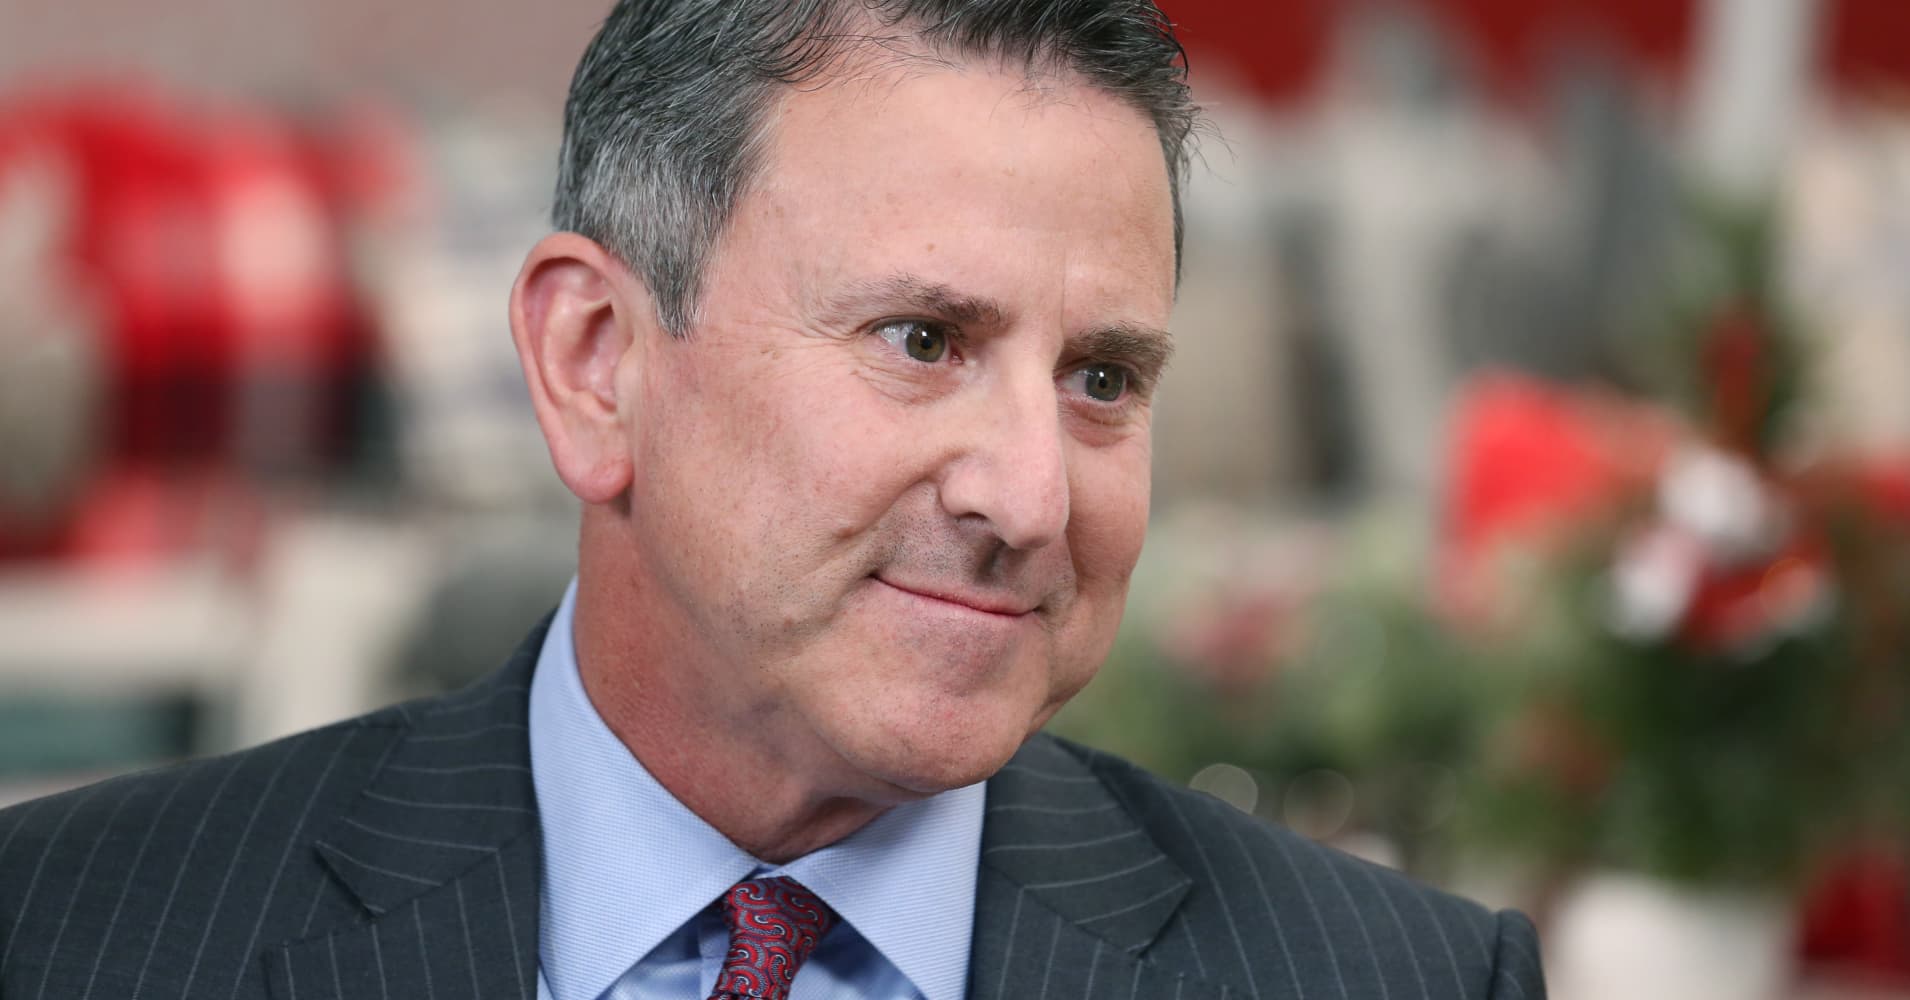 Target CEO Brian Cornell says 'no sign' consumer spending is slowing ahead of holidays